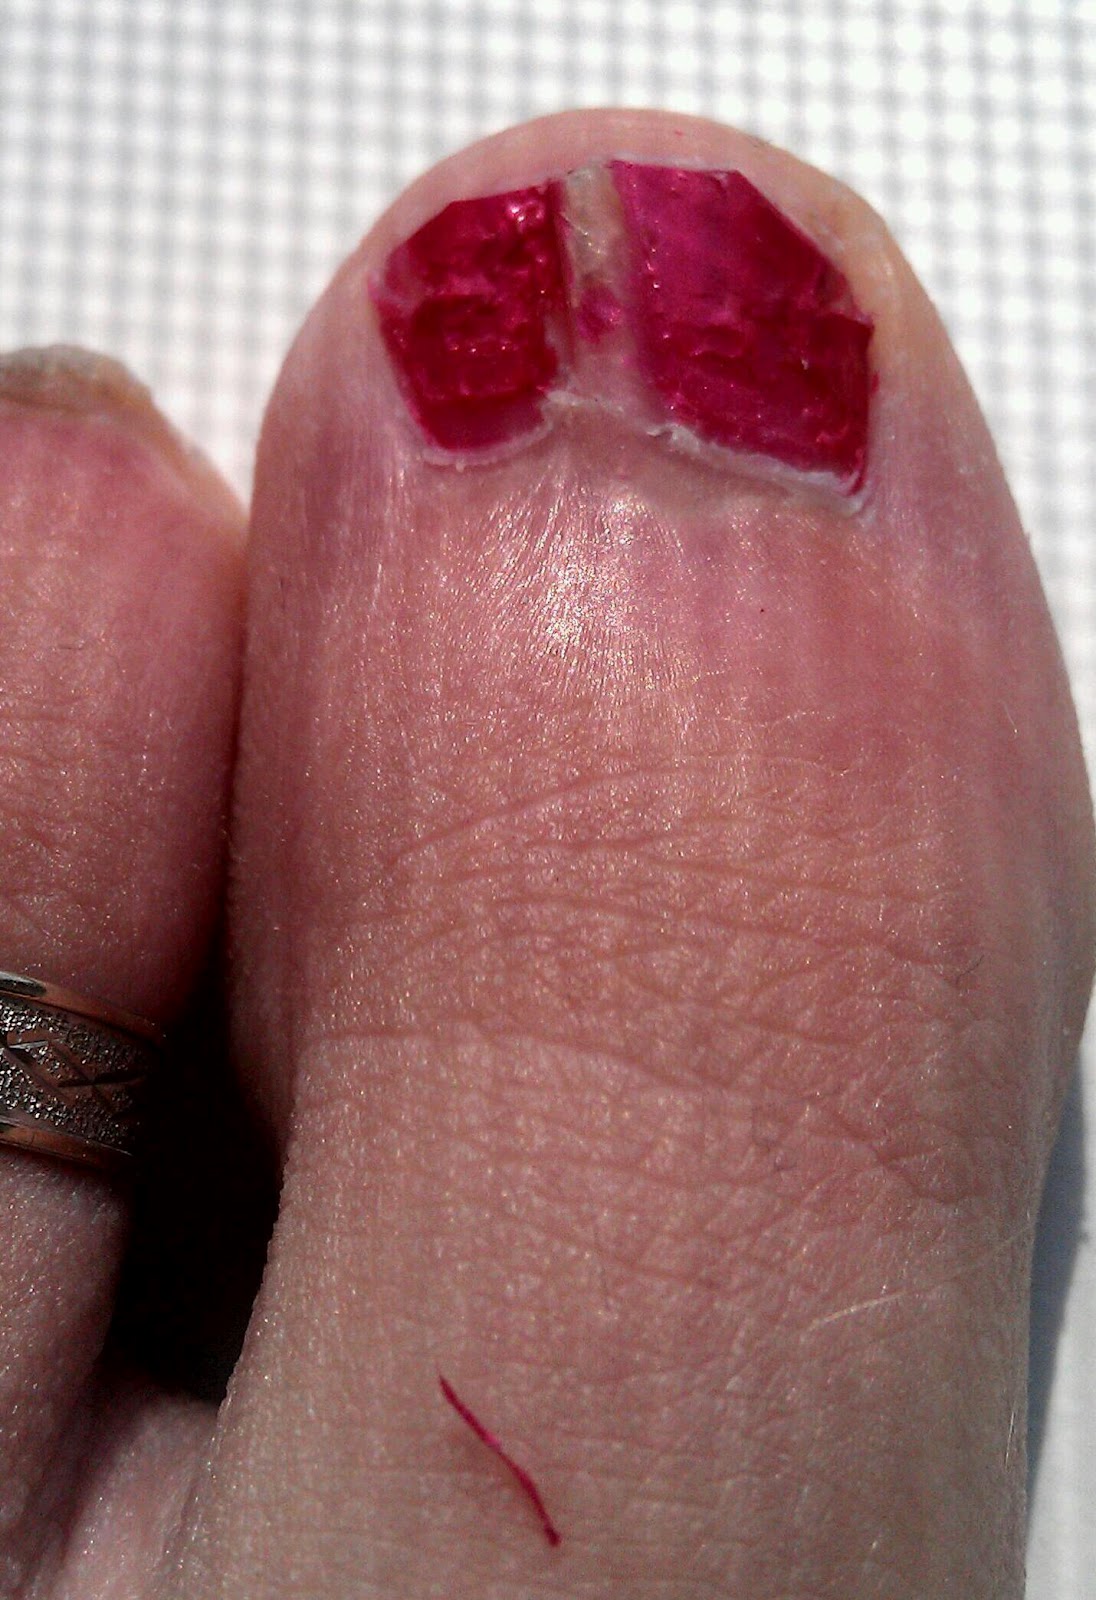 Nail Cracked Down Middle